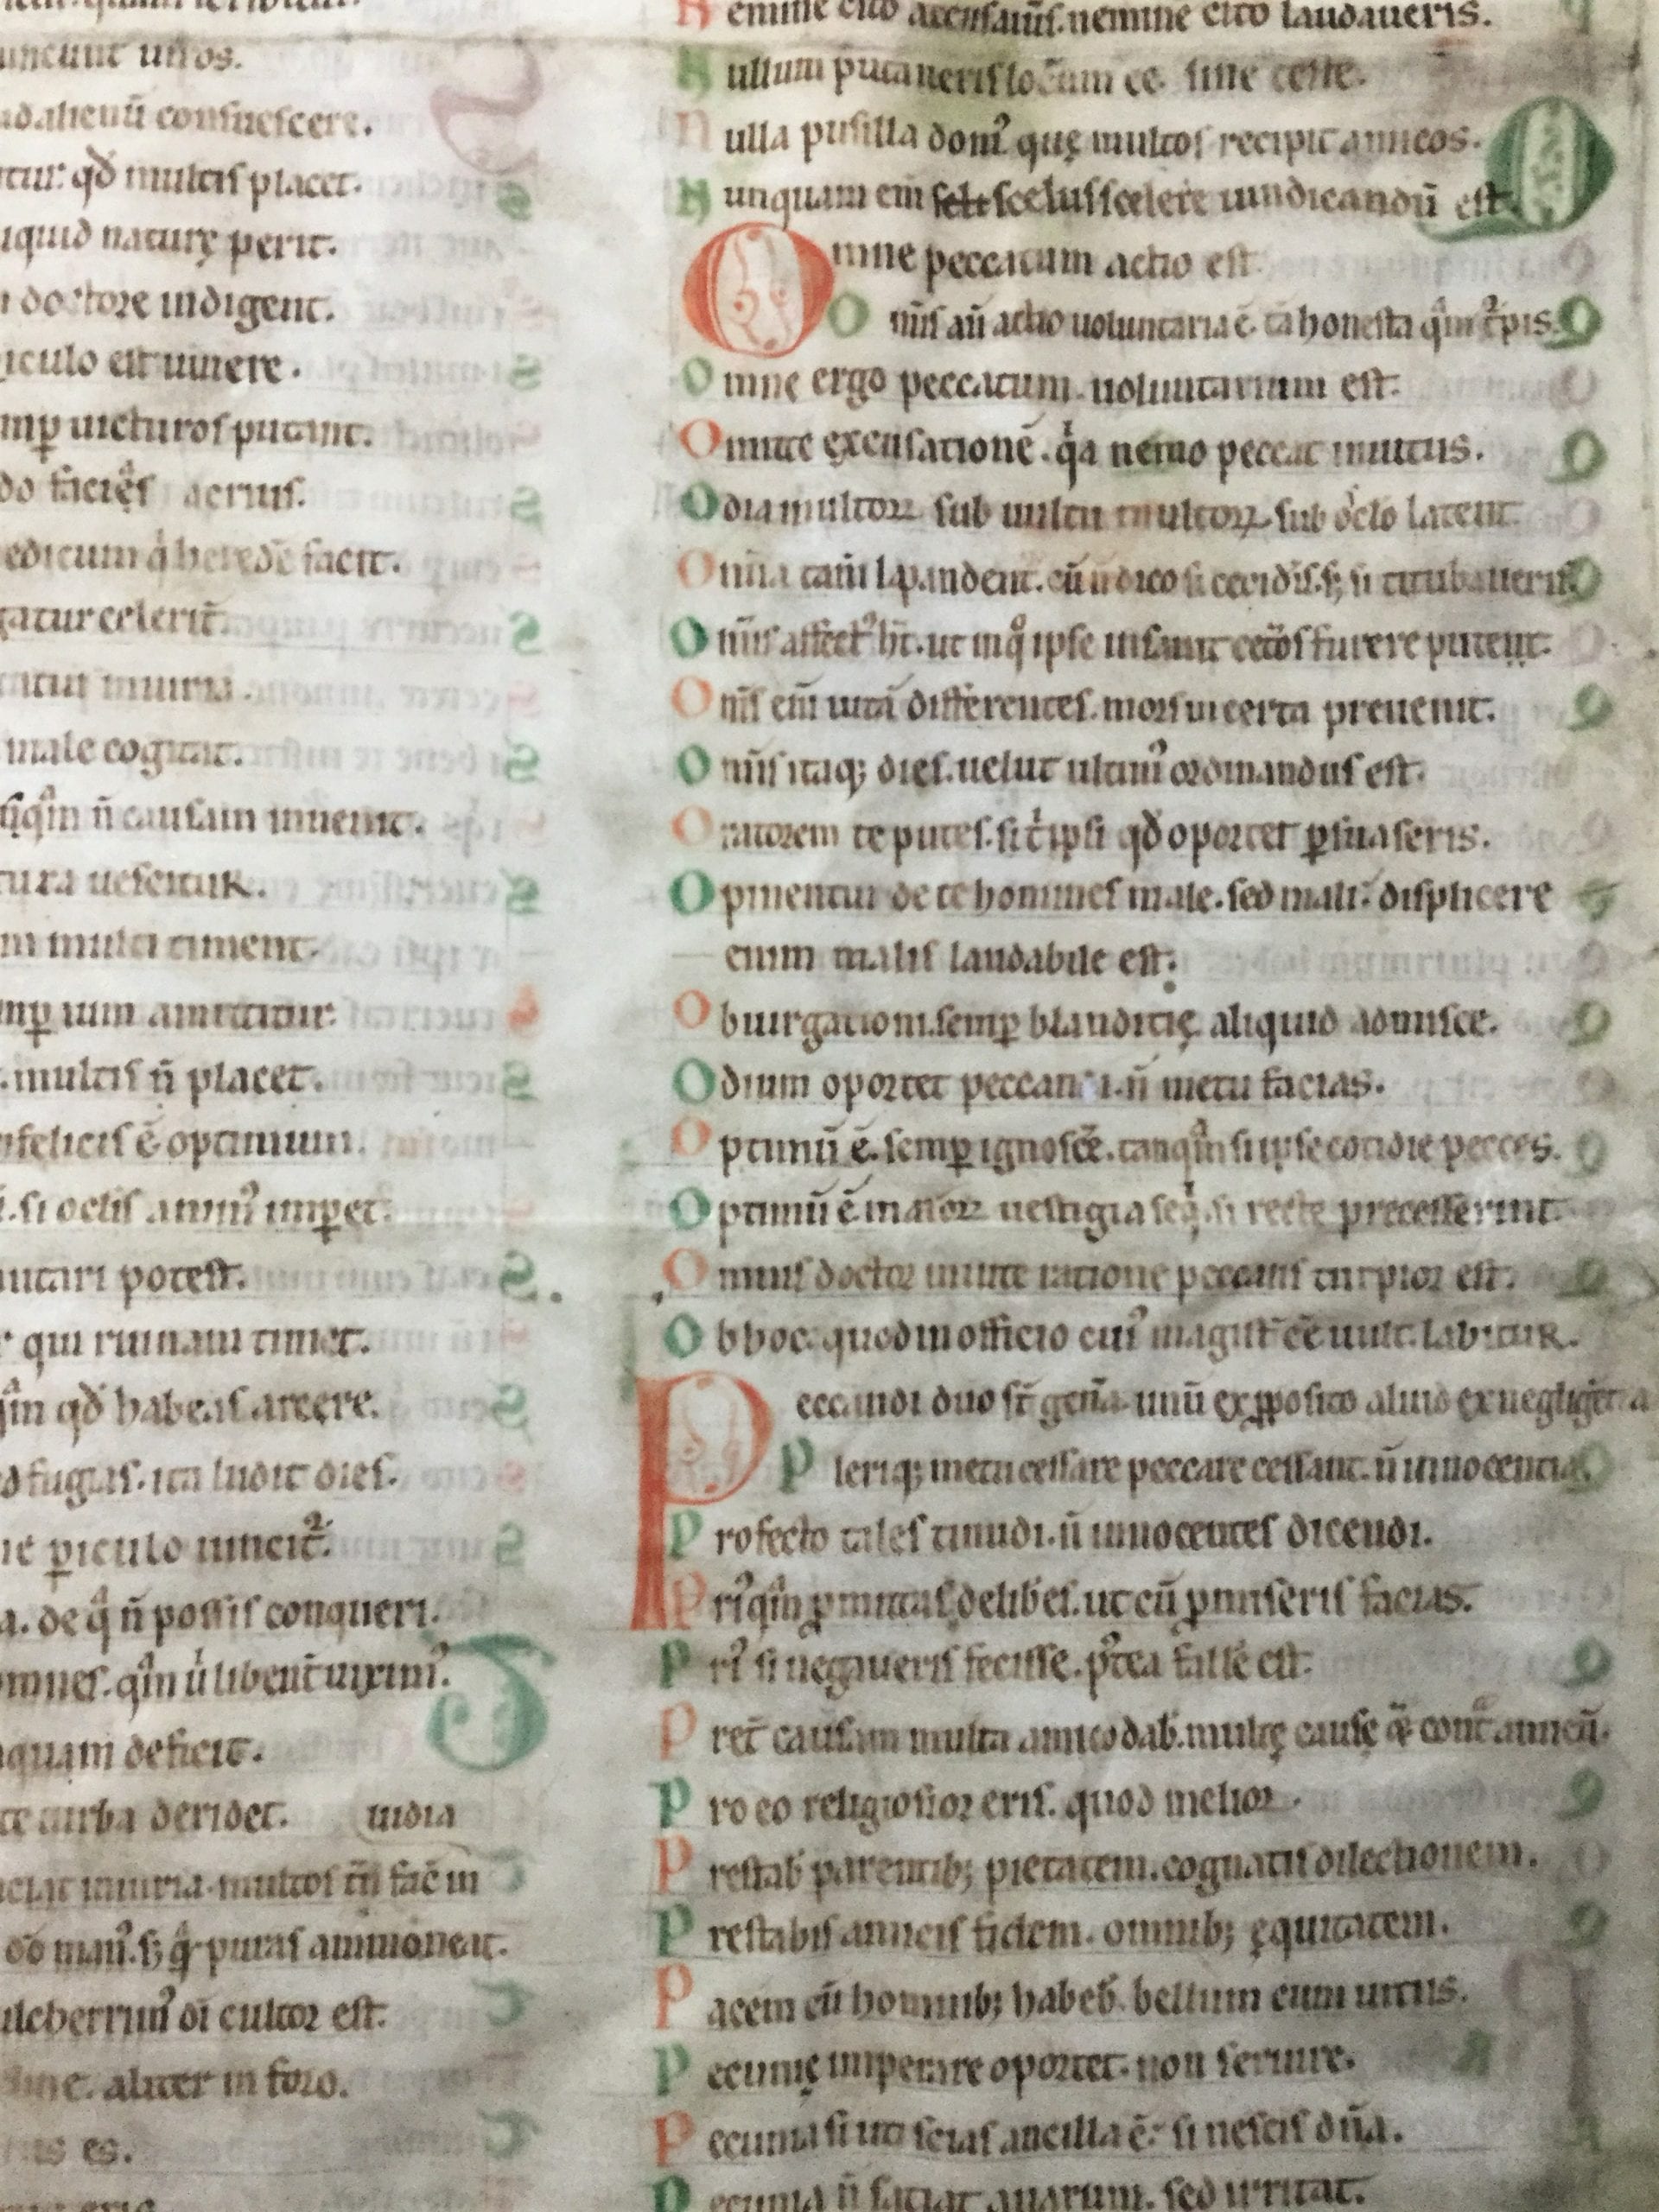 12th-century bifolium from André Simon's library - text by Isidore of Seville and Publilius Syrus